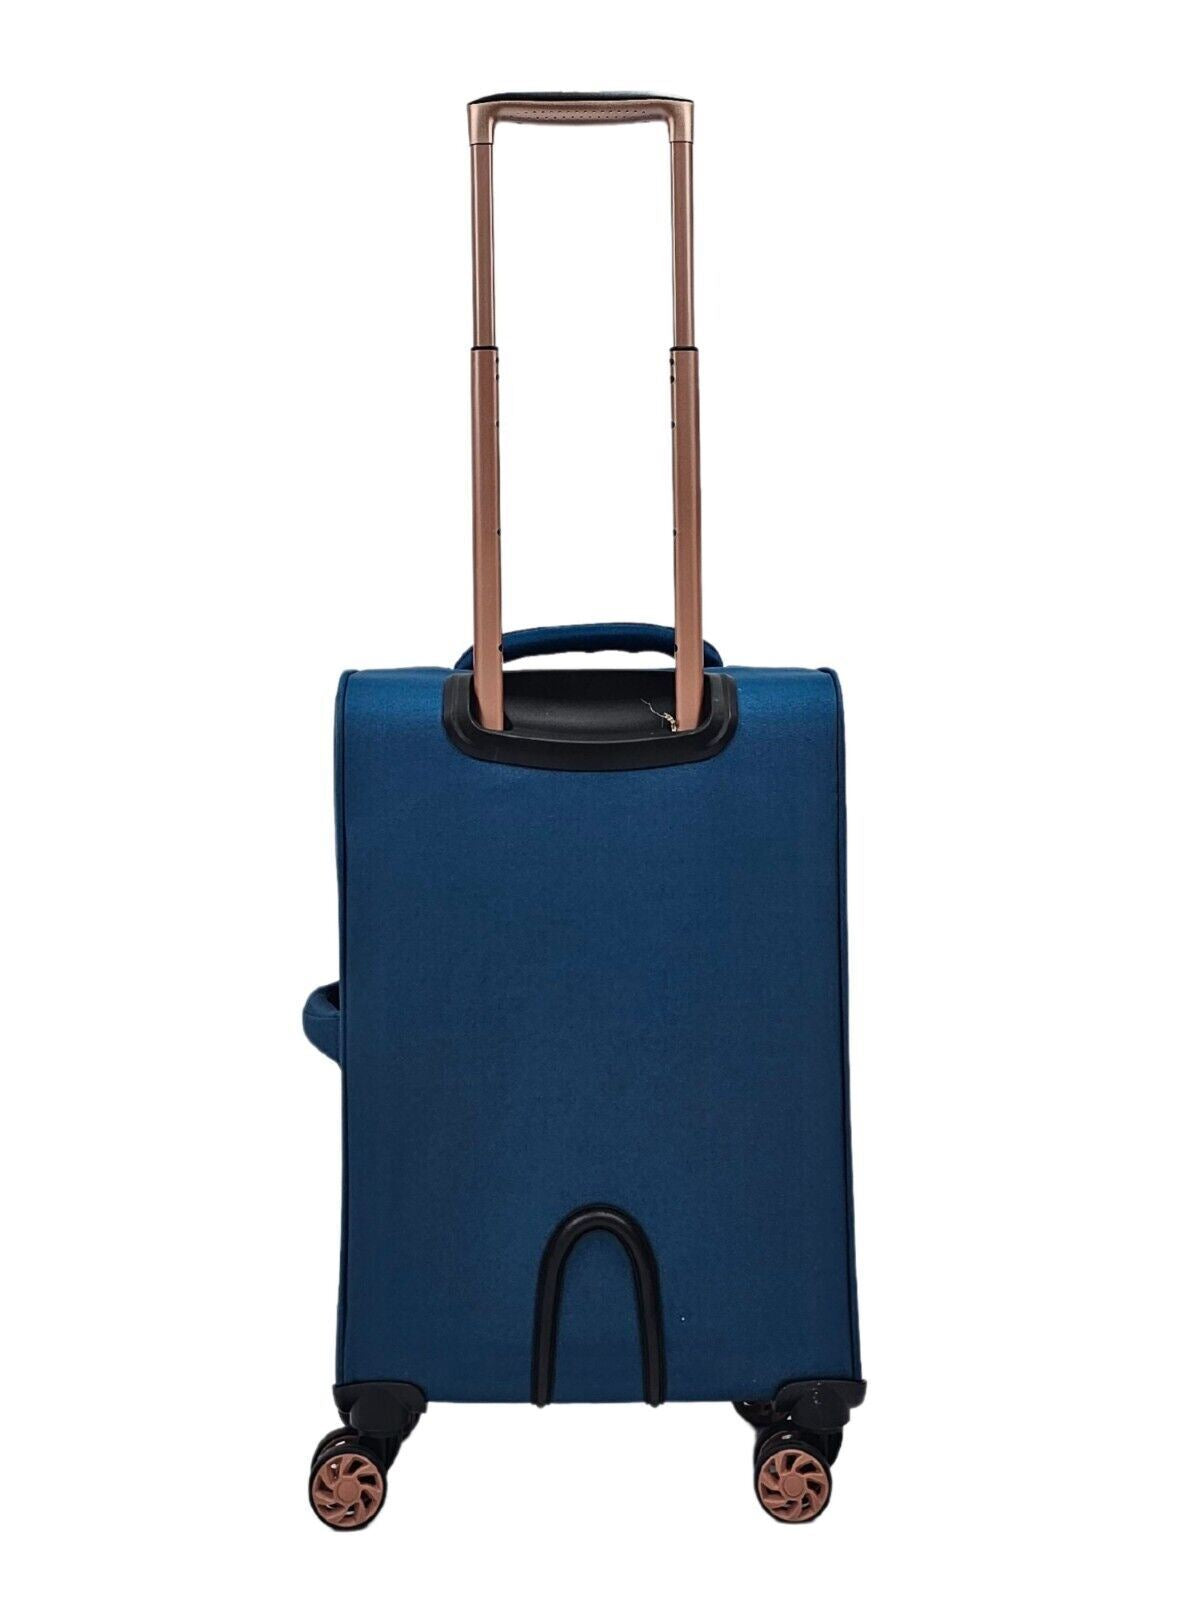 Birmingham Cabin Soft Shell Suitcase in Teal